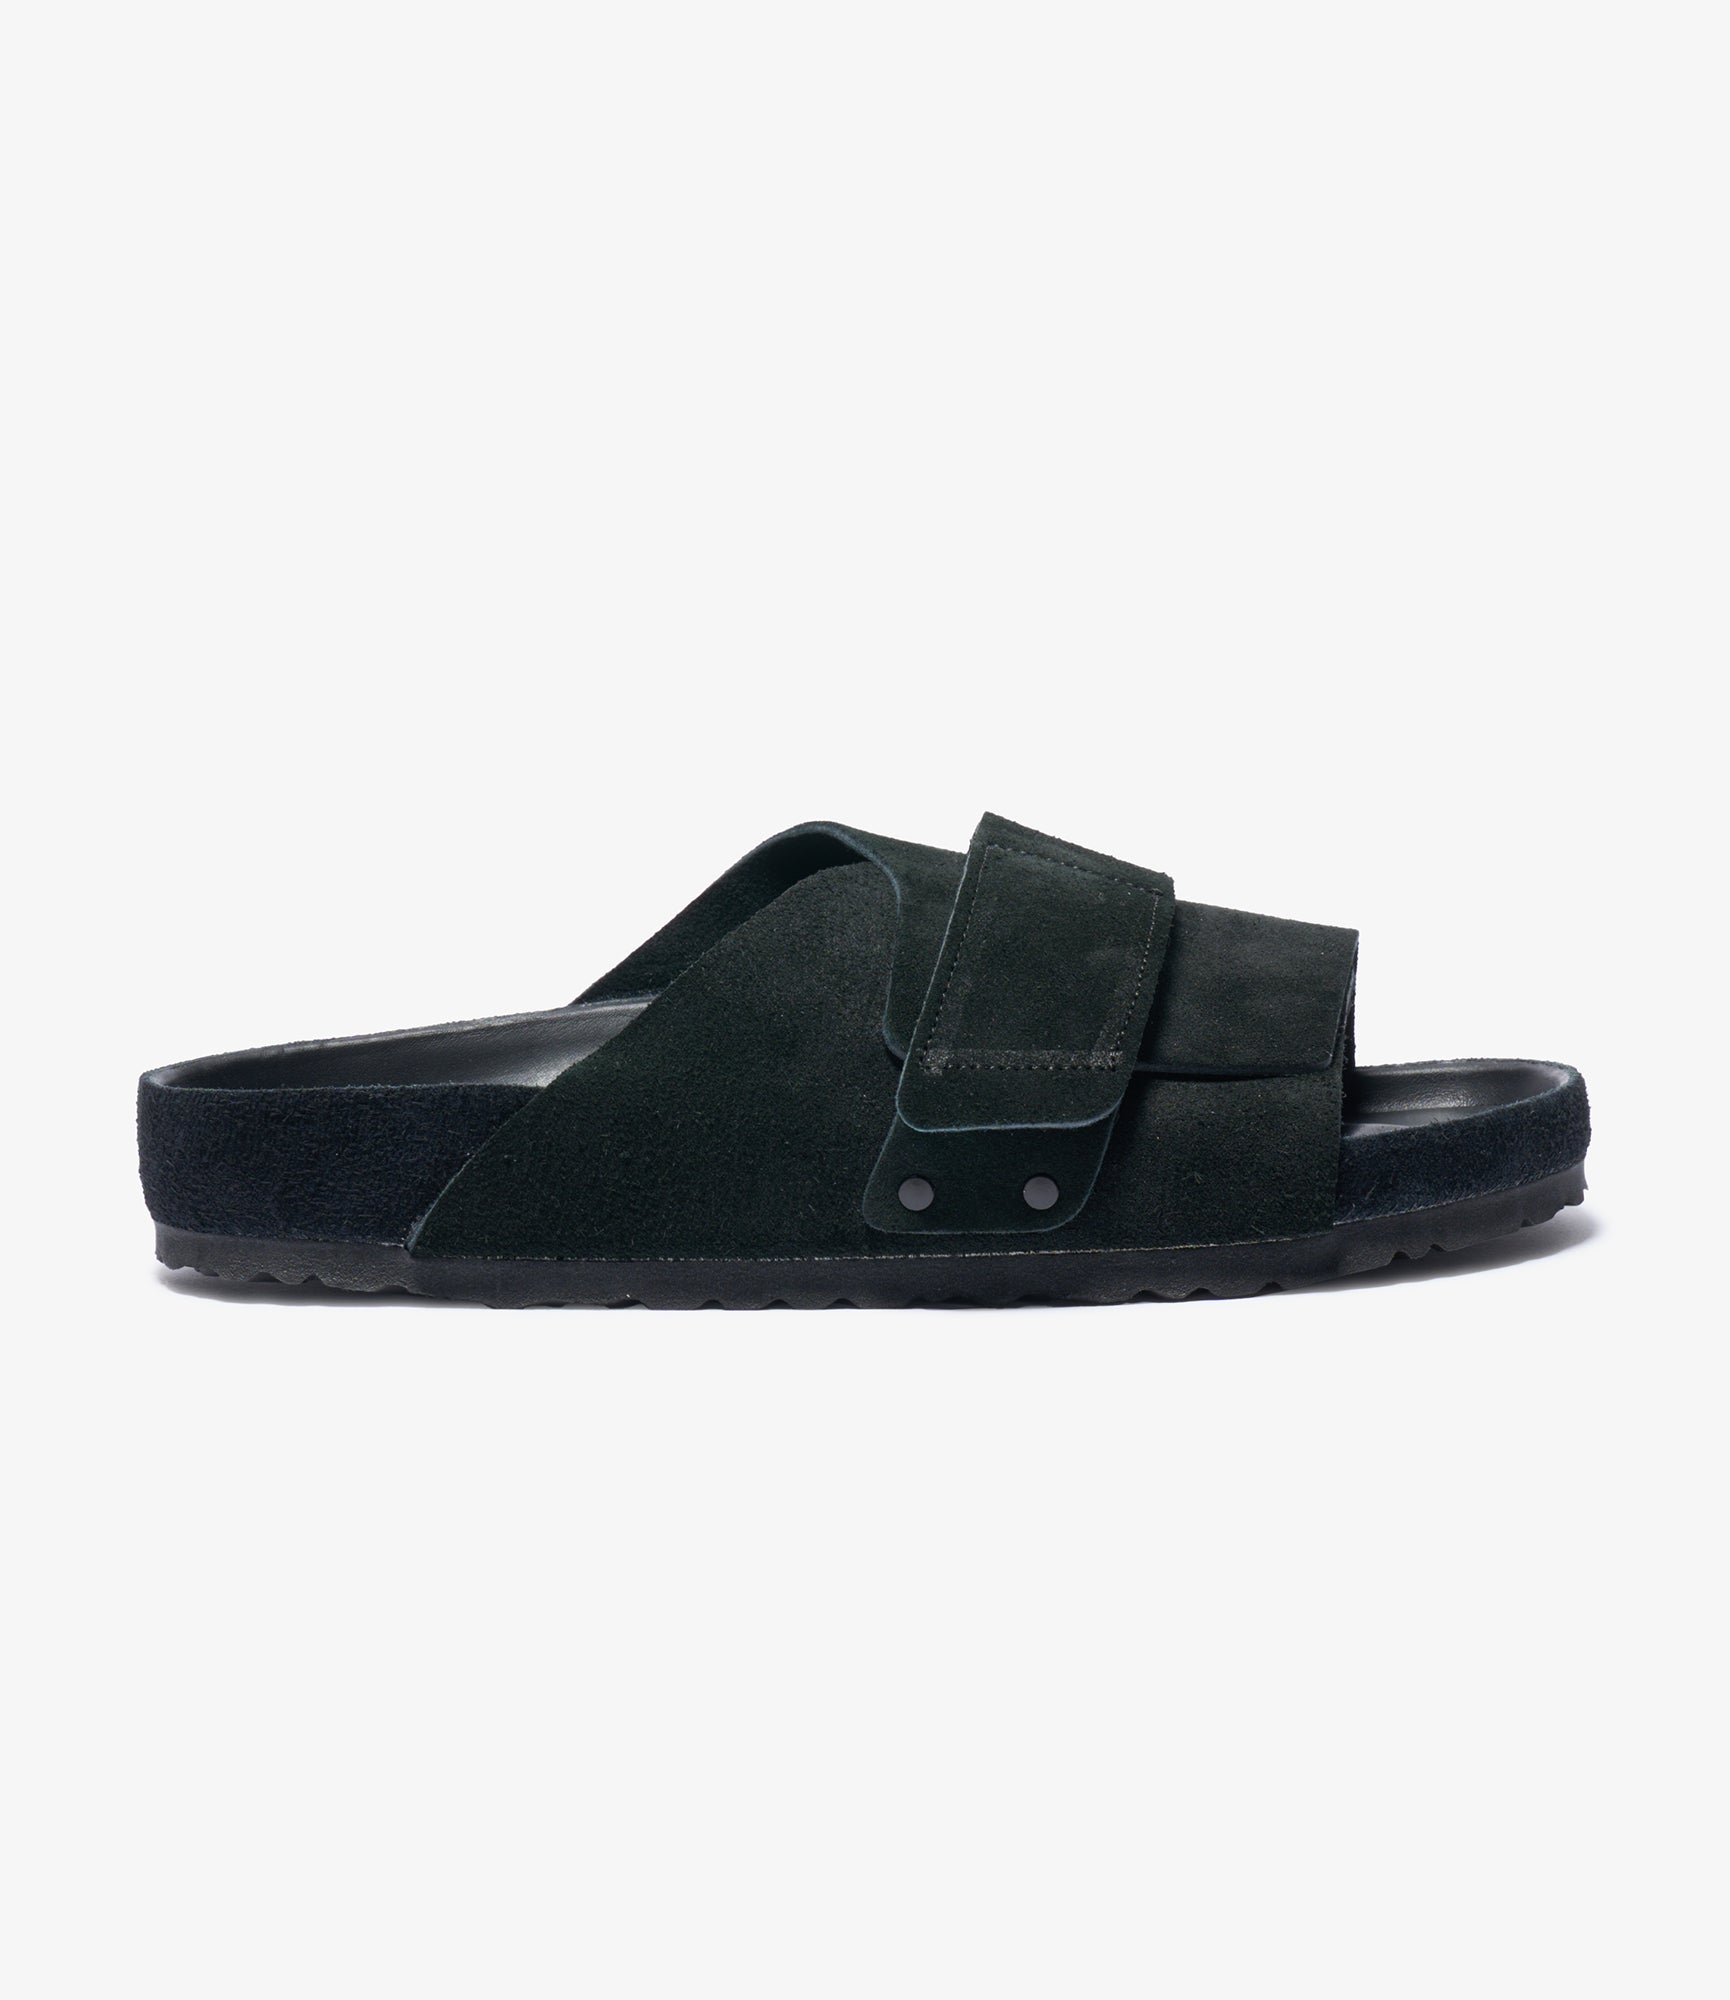 Kyoto - Black Suede | Nepenthes New York